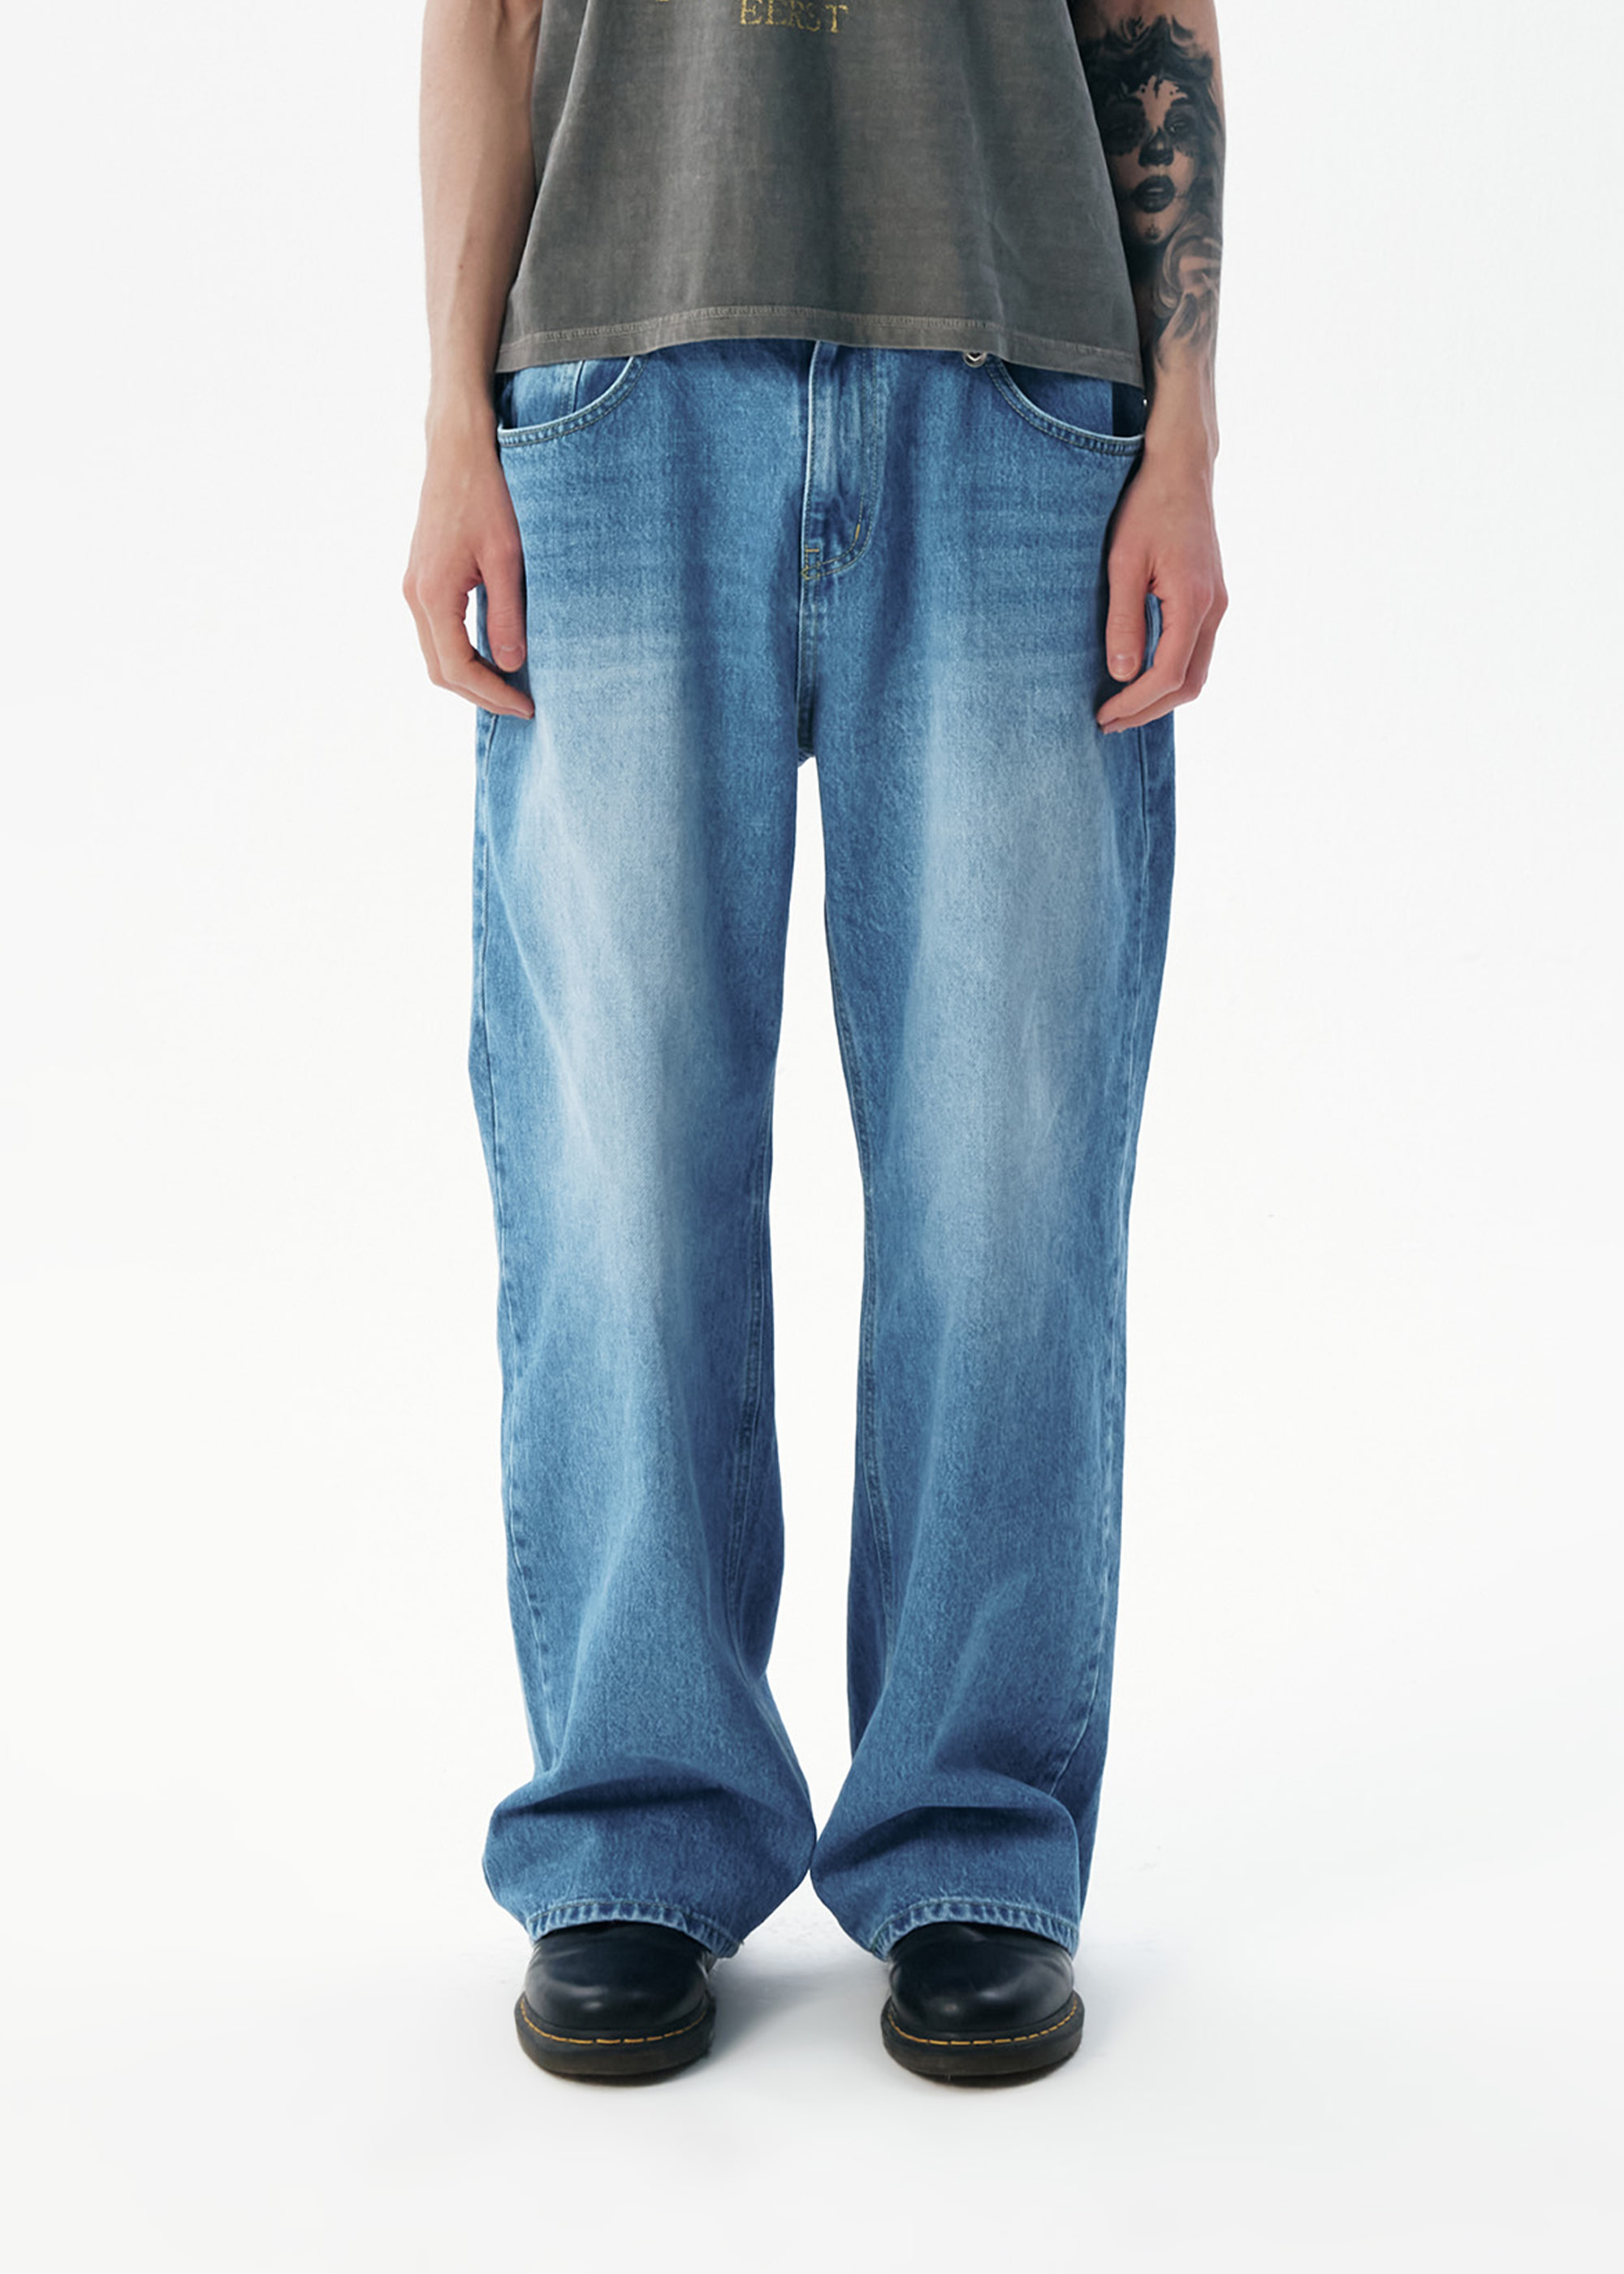 M-Astral Jeans [Blue]